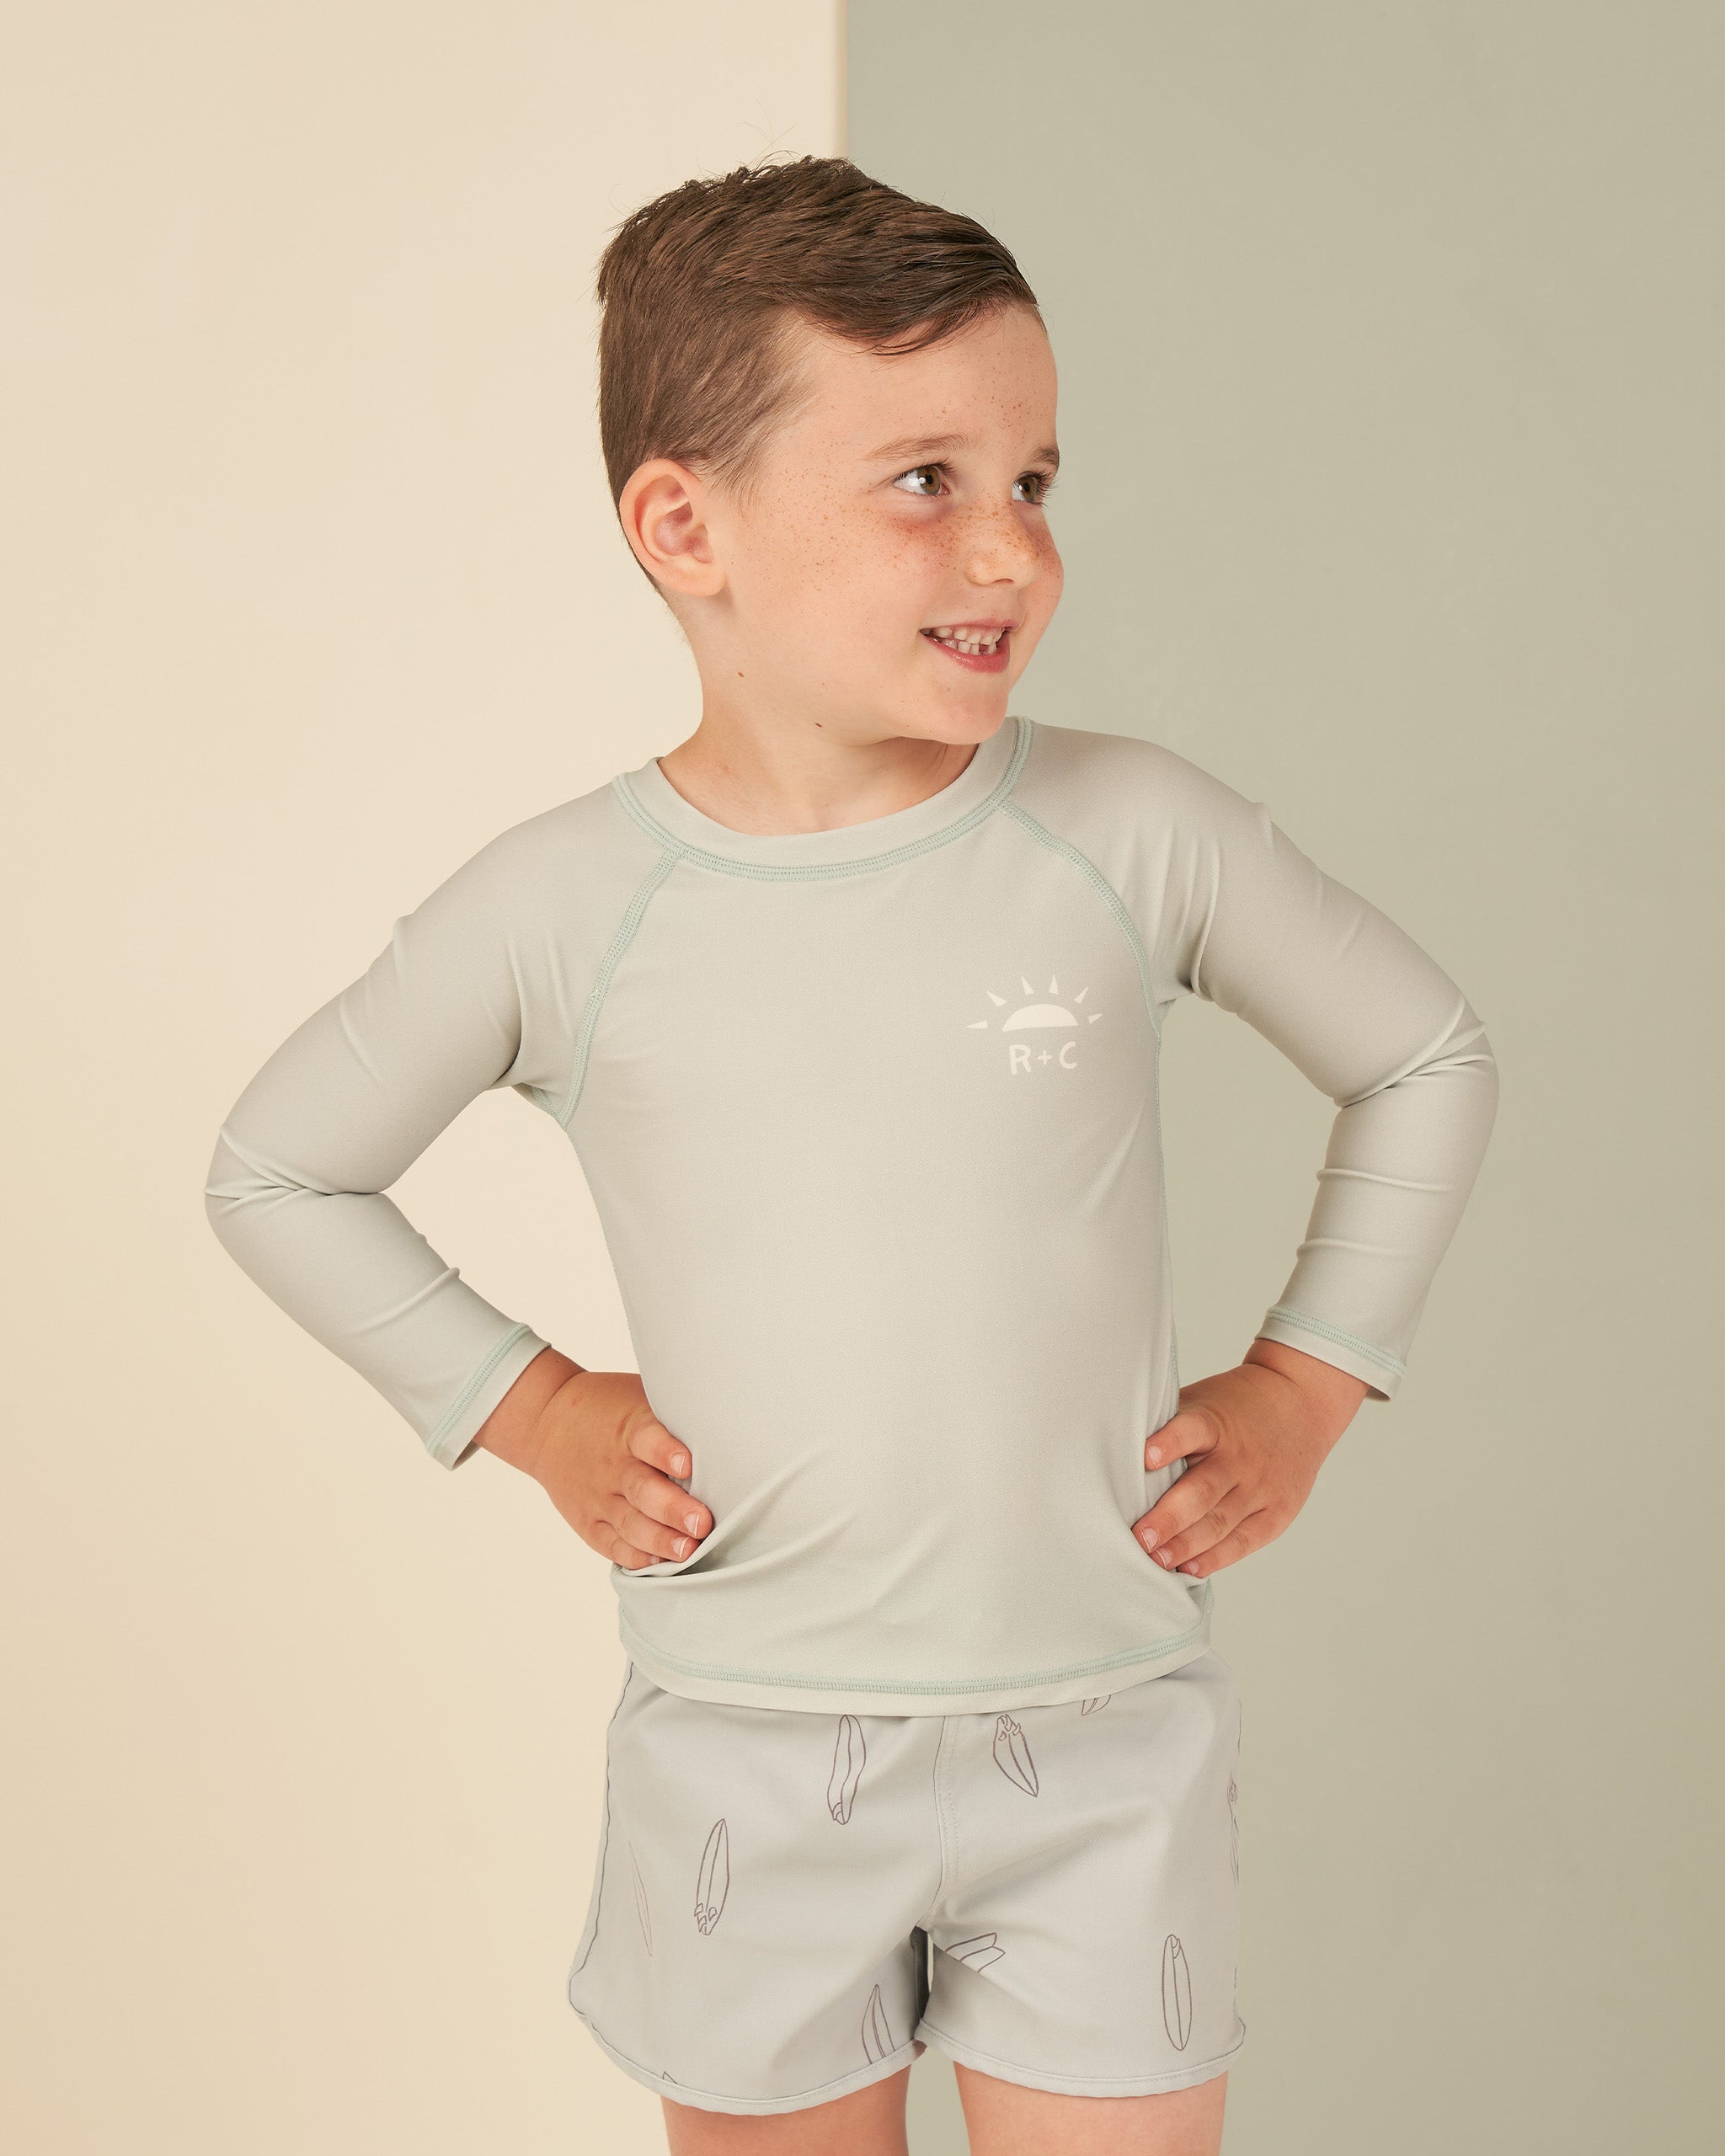 Rash Guard || Seafoam - Rylee + Cru | Kids Clothes | Trendy Baby Clothes | Modern Infant Outfits |